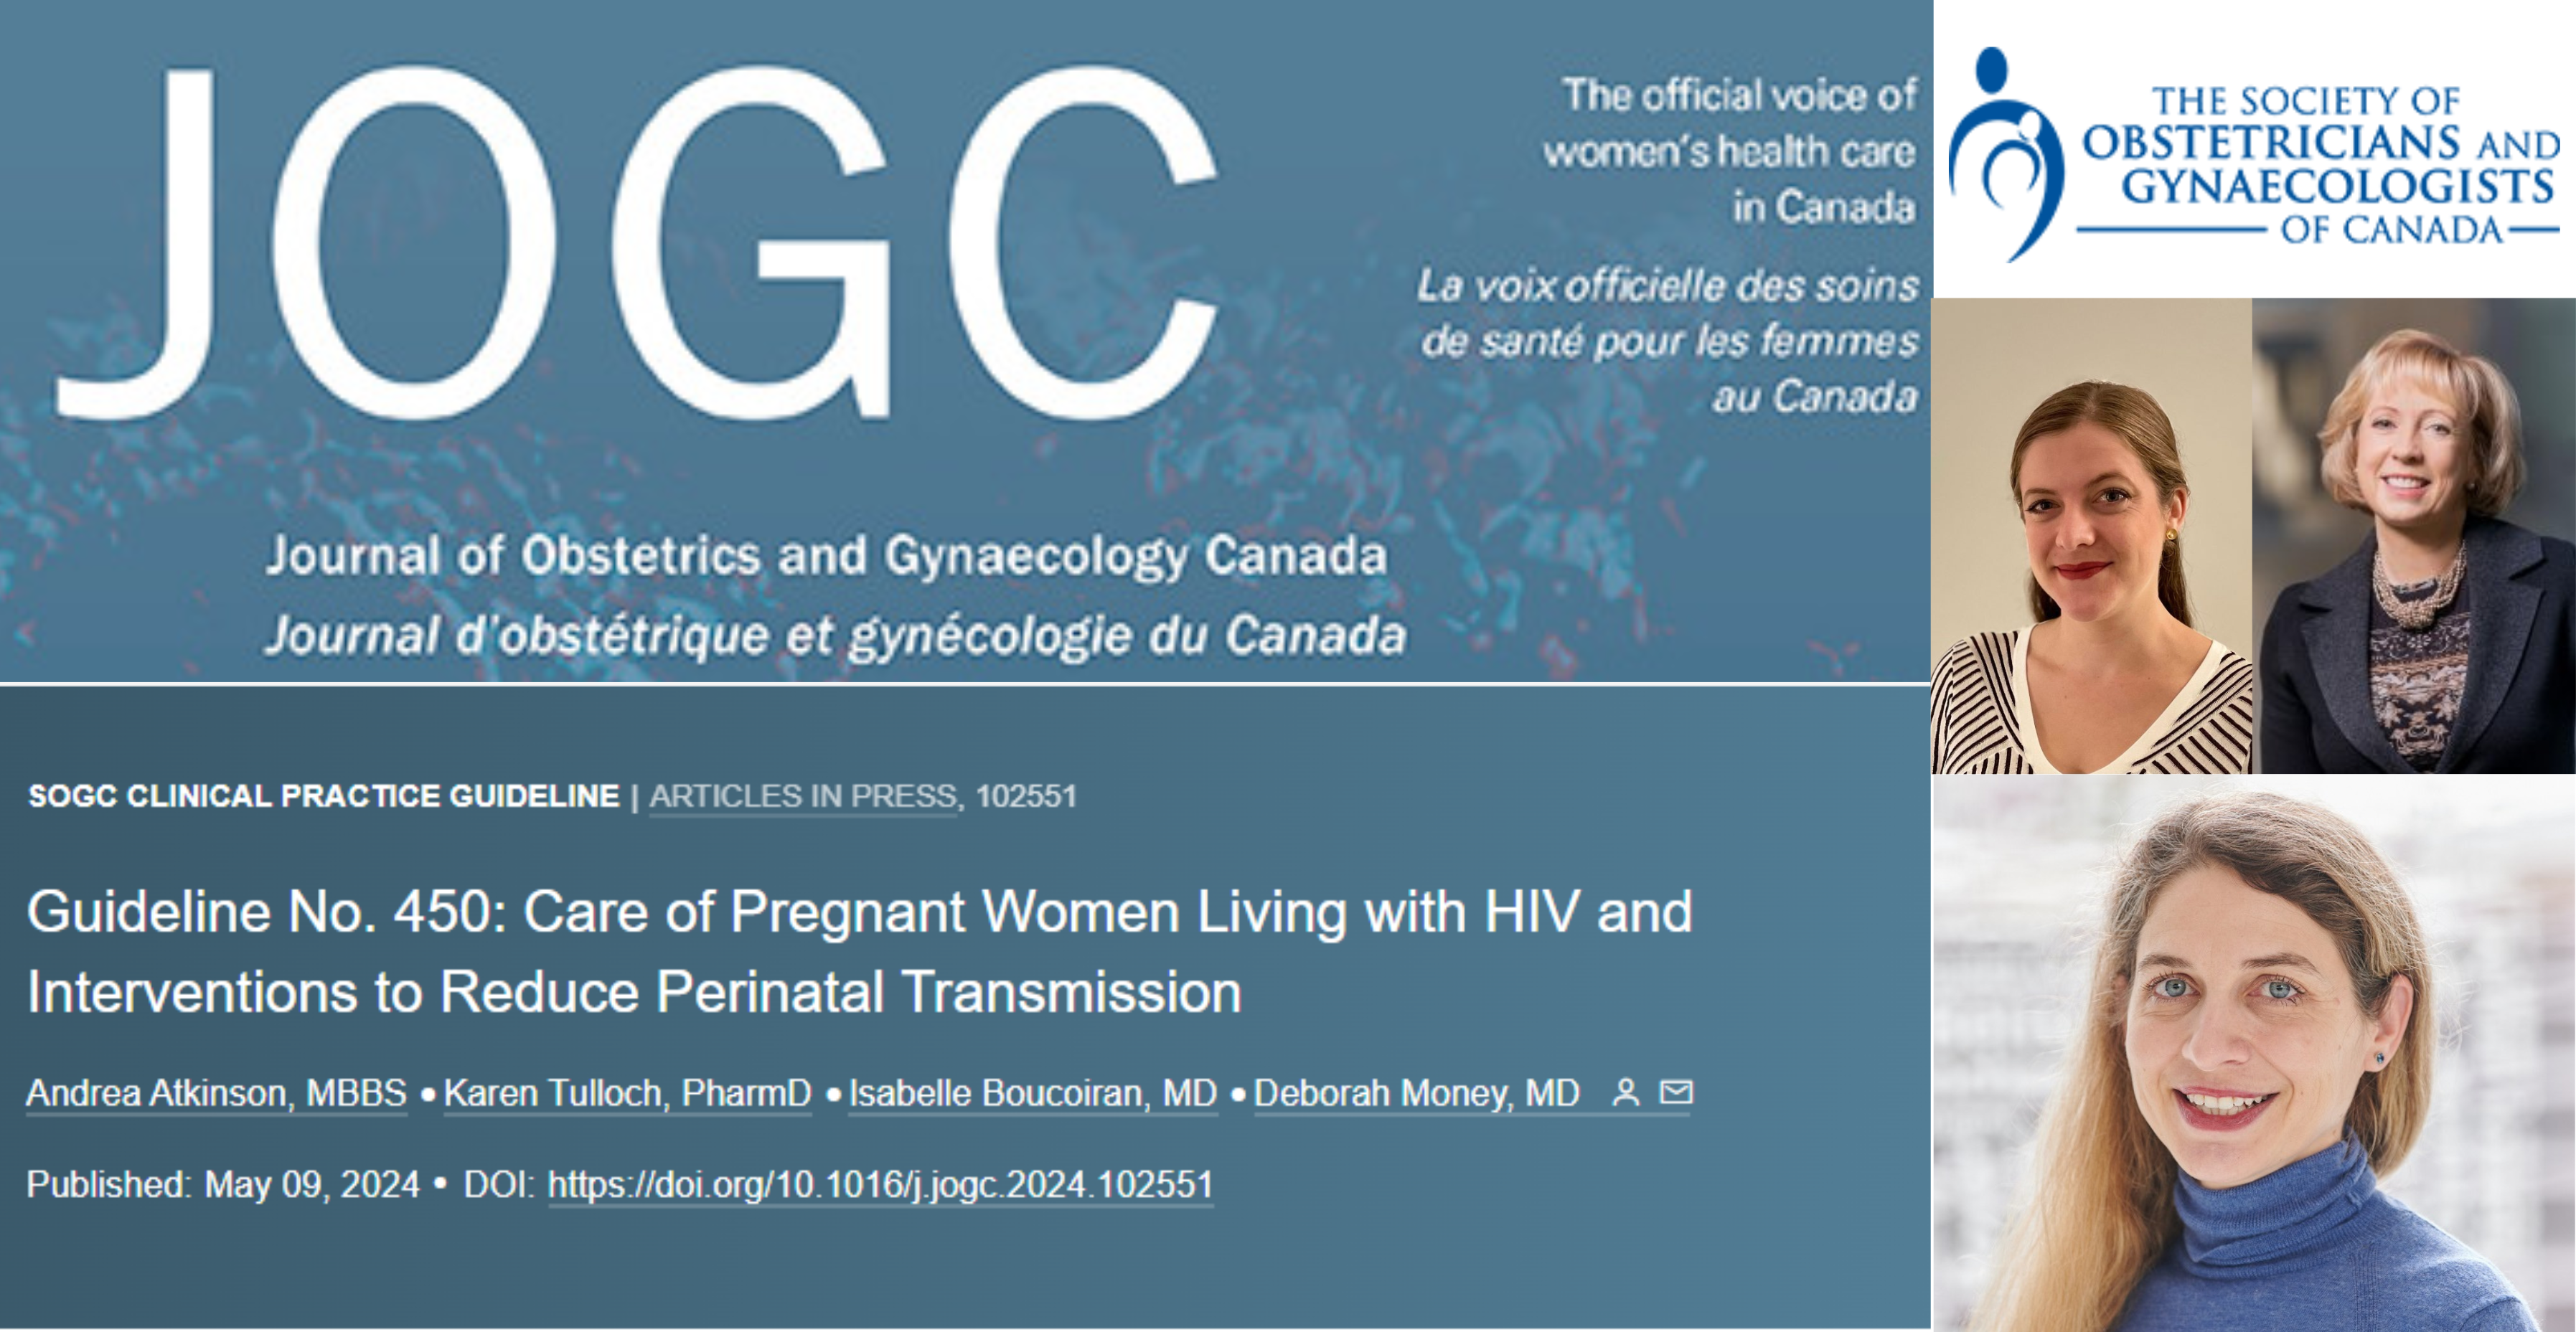 New SOGC Clinical Practice Guideline “Guideline No. 450: Care of Pregnant Women Living with HIV and Interventions to Reduce Perinatal Transmission” in press in JOGC!